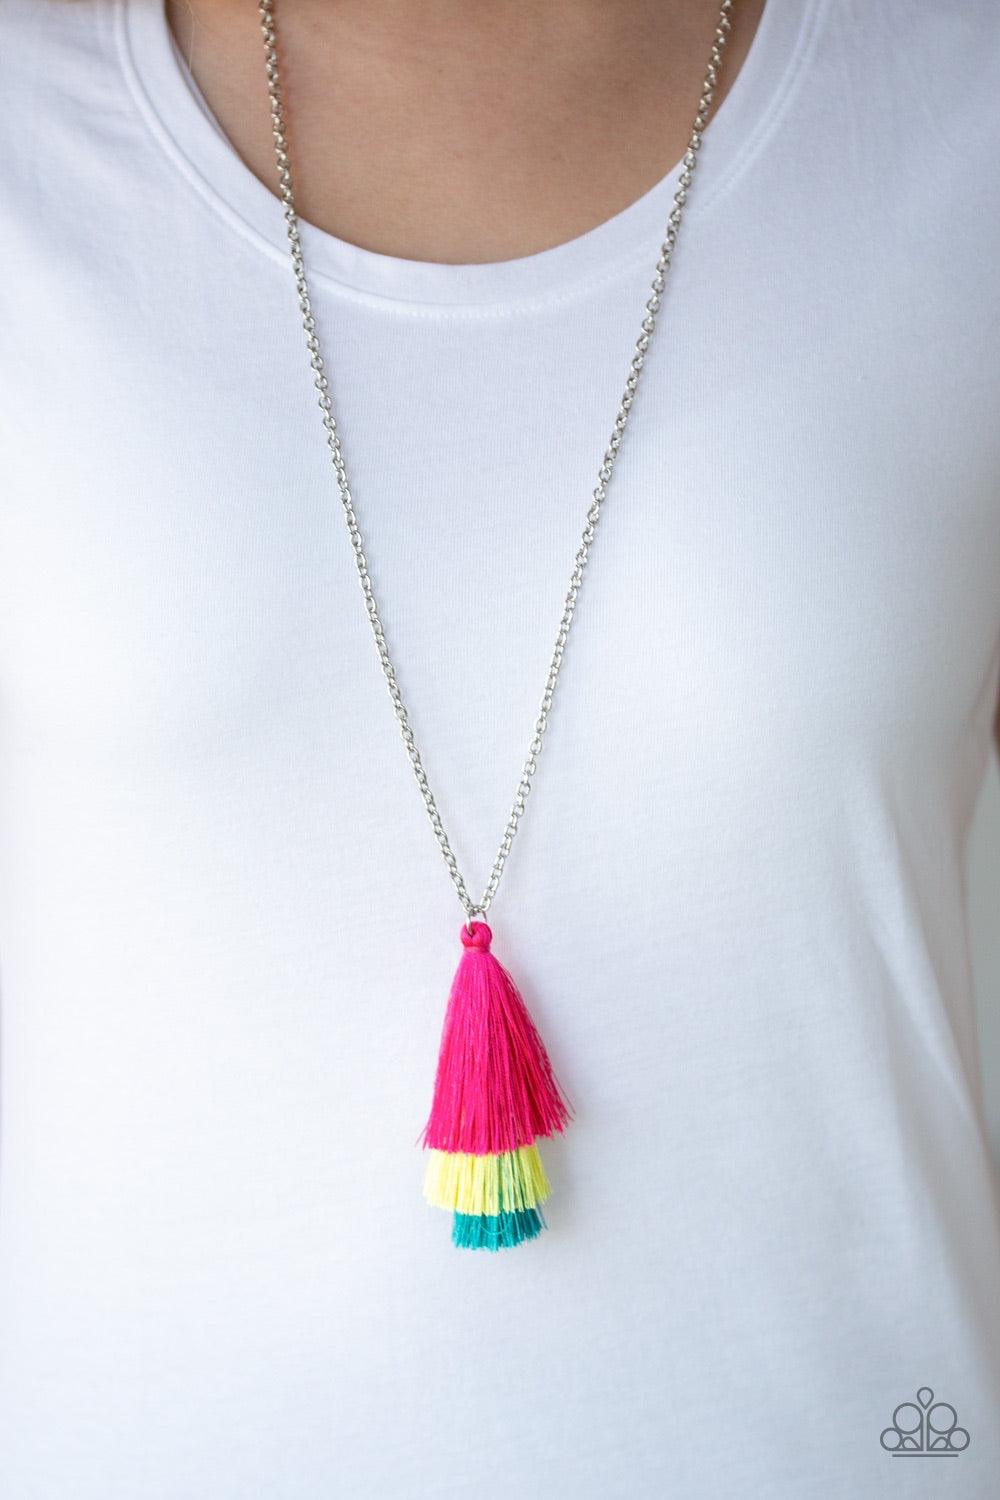 Paparazzi Accessories Triple The Tassel - Multi Featuring shimmery pink, yellow, and blue thread, a 3-tiered tassel swings from the bottom of a lengthened silver chain for a colorful, wanderlust vibe. Features an adjustable clasp closure. Jewelry